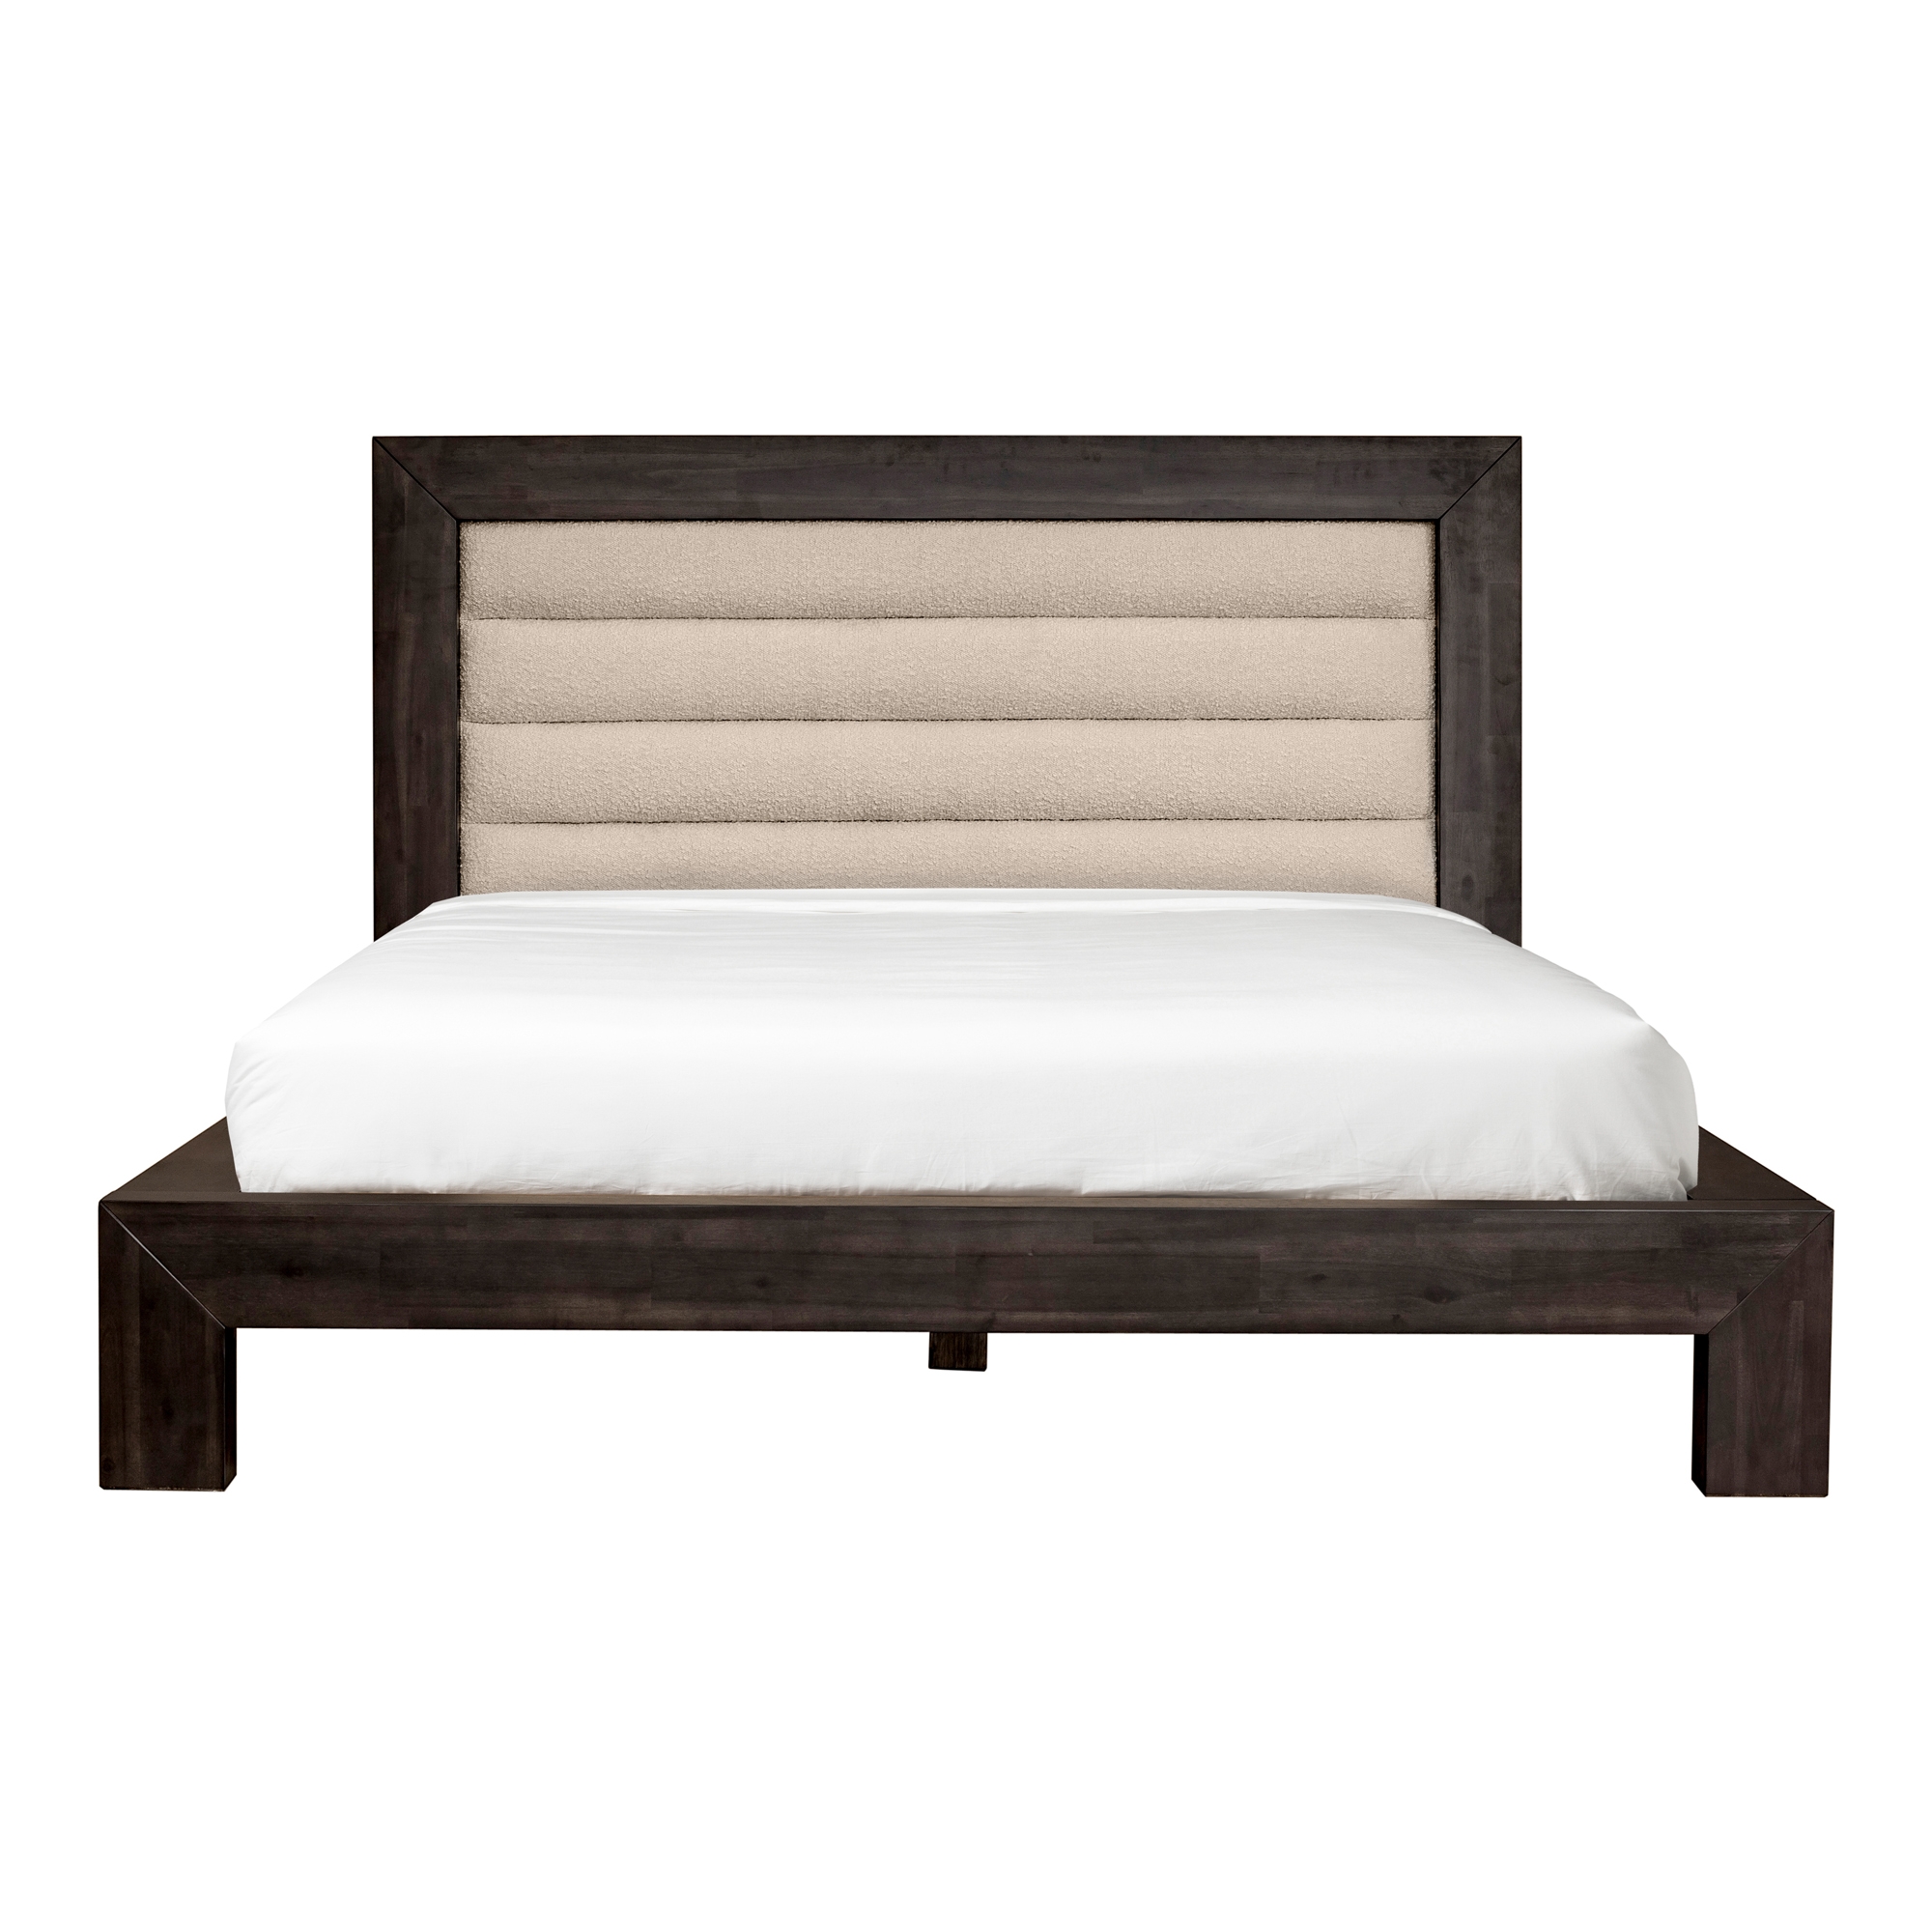 Ashcroft Queen Bed - Image 9